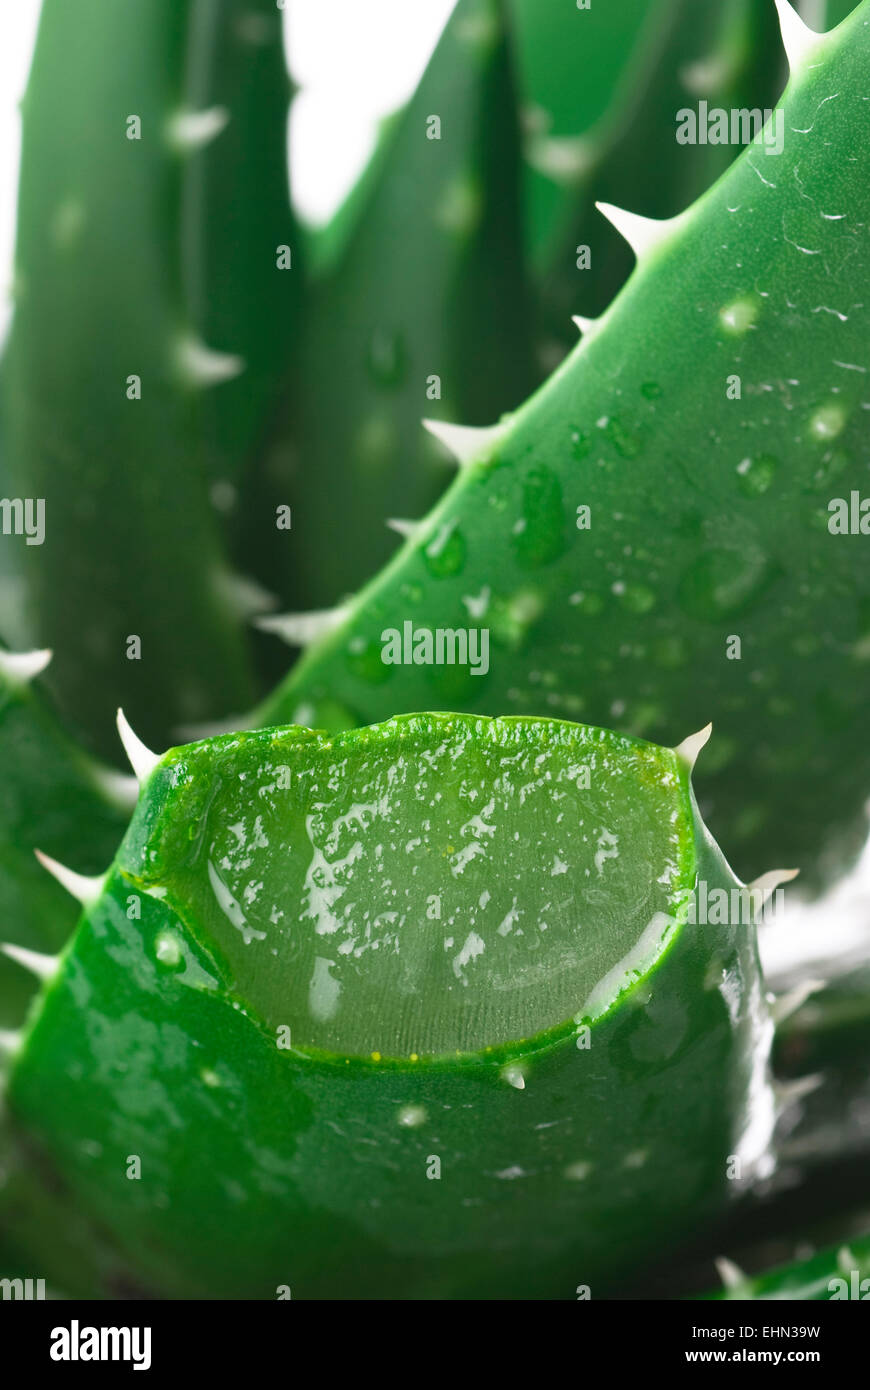 Aloe vera plant close up with water drops. Stock Photo